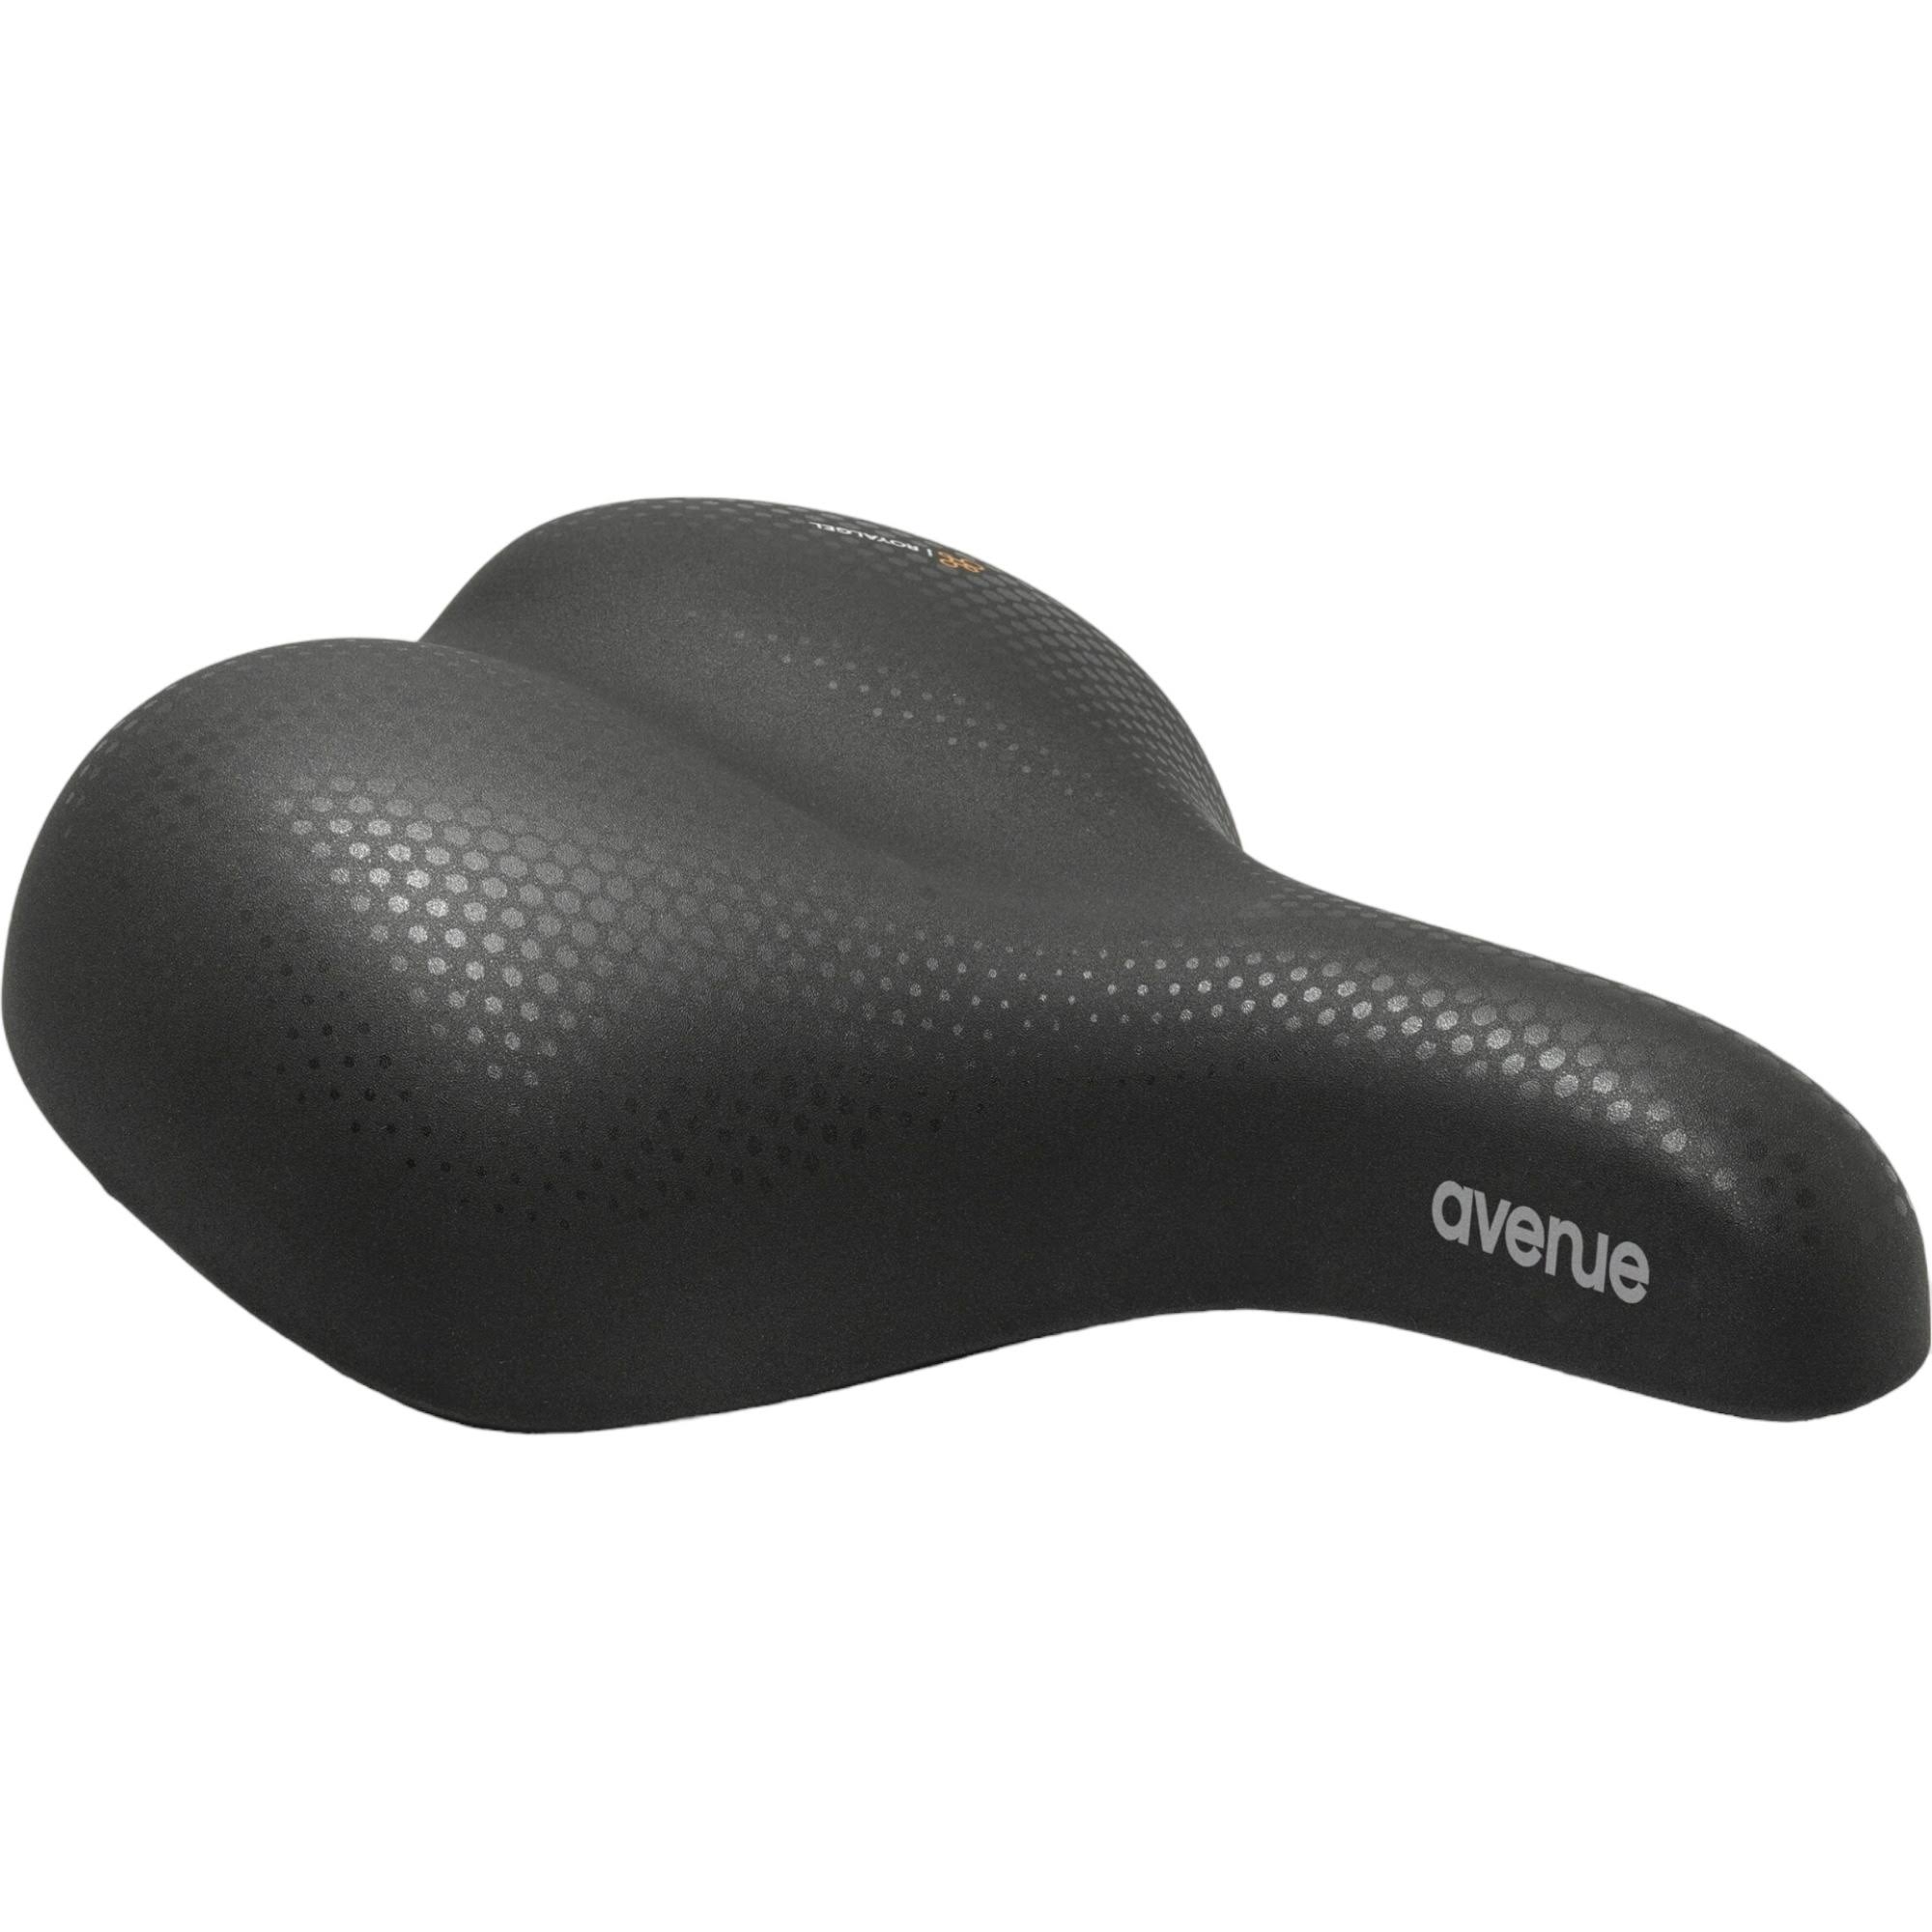 Selle Royal Avenue Relaxed Saddle Black 158 mm